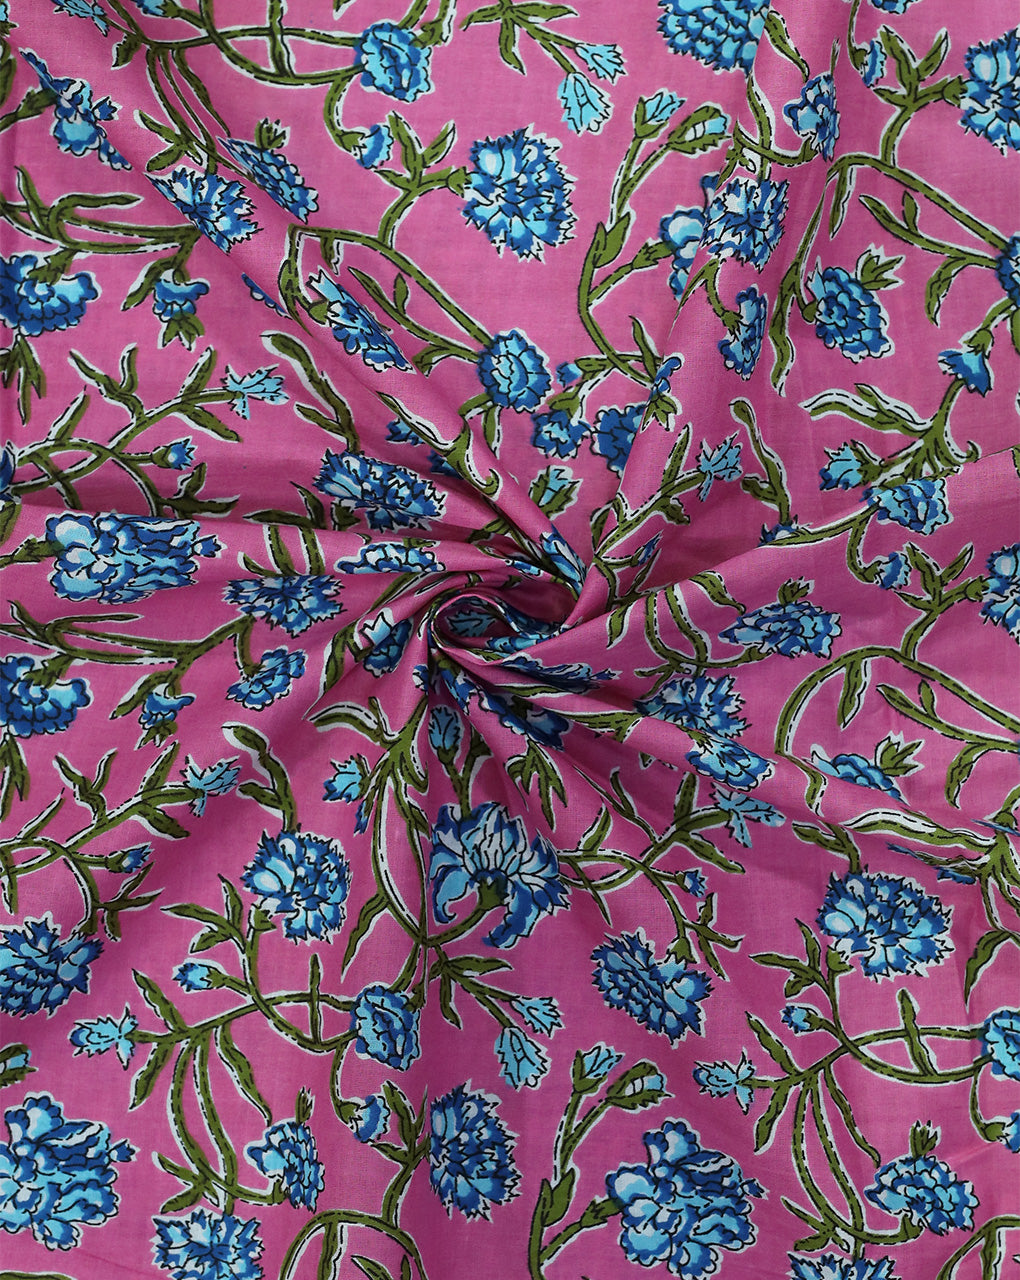 PINK FLORAL DESIGN COTTON PRINTED FABRIC